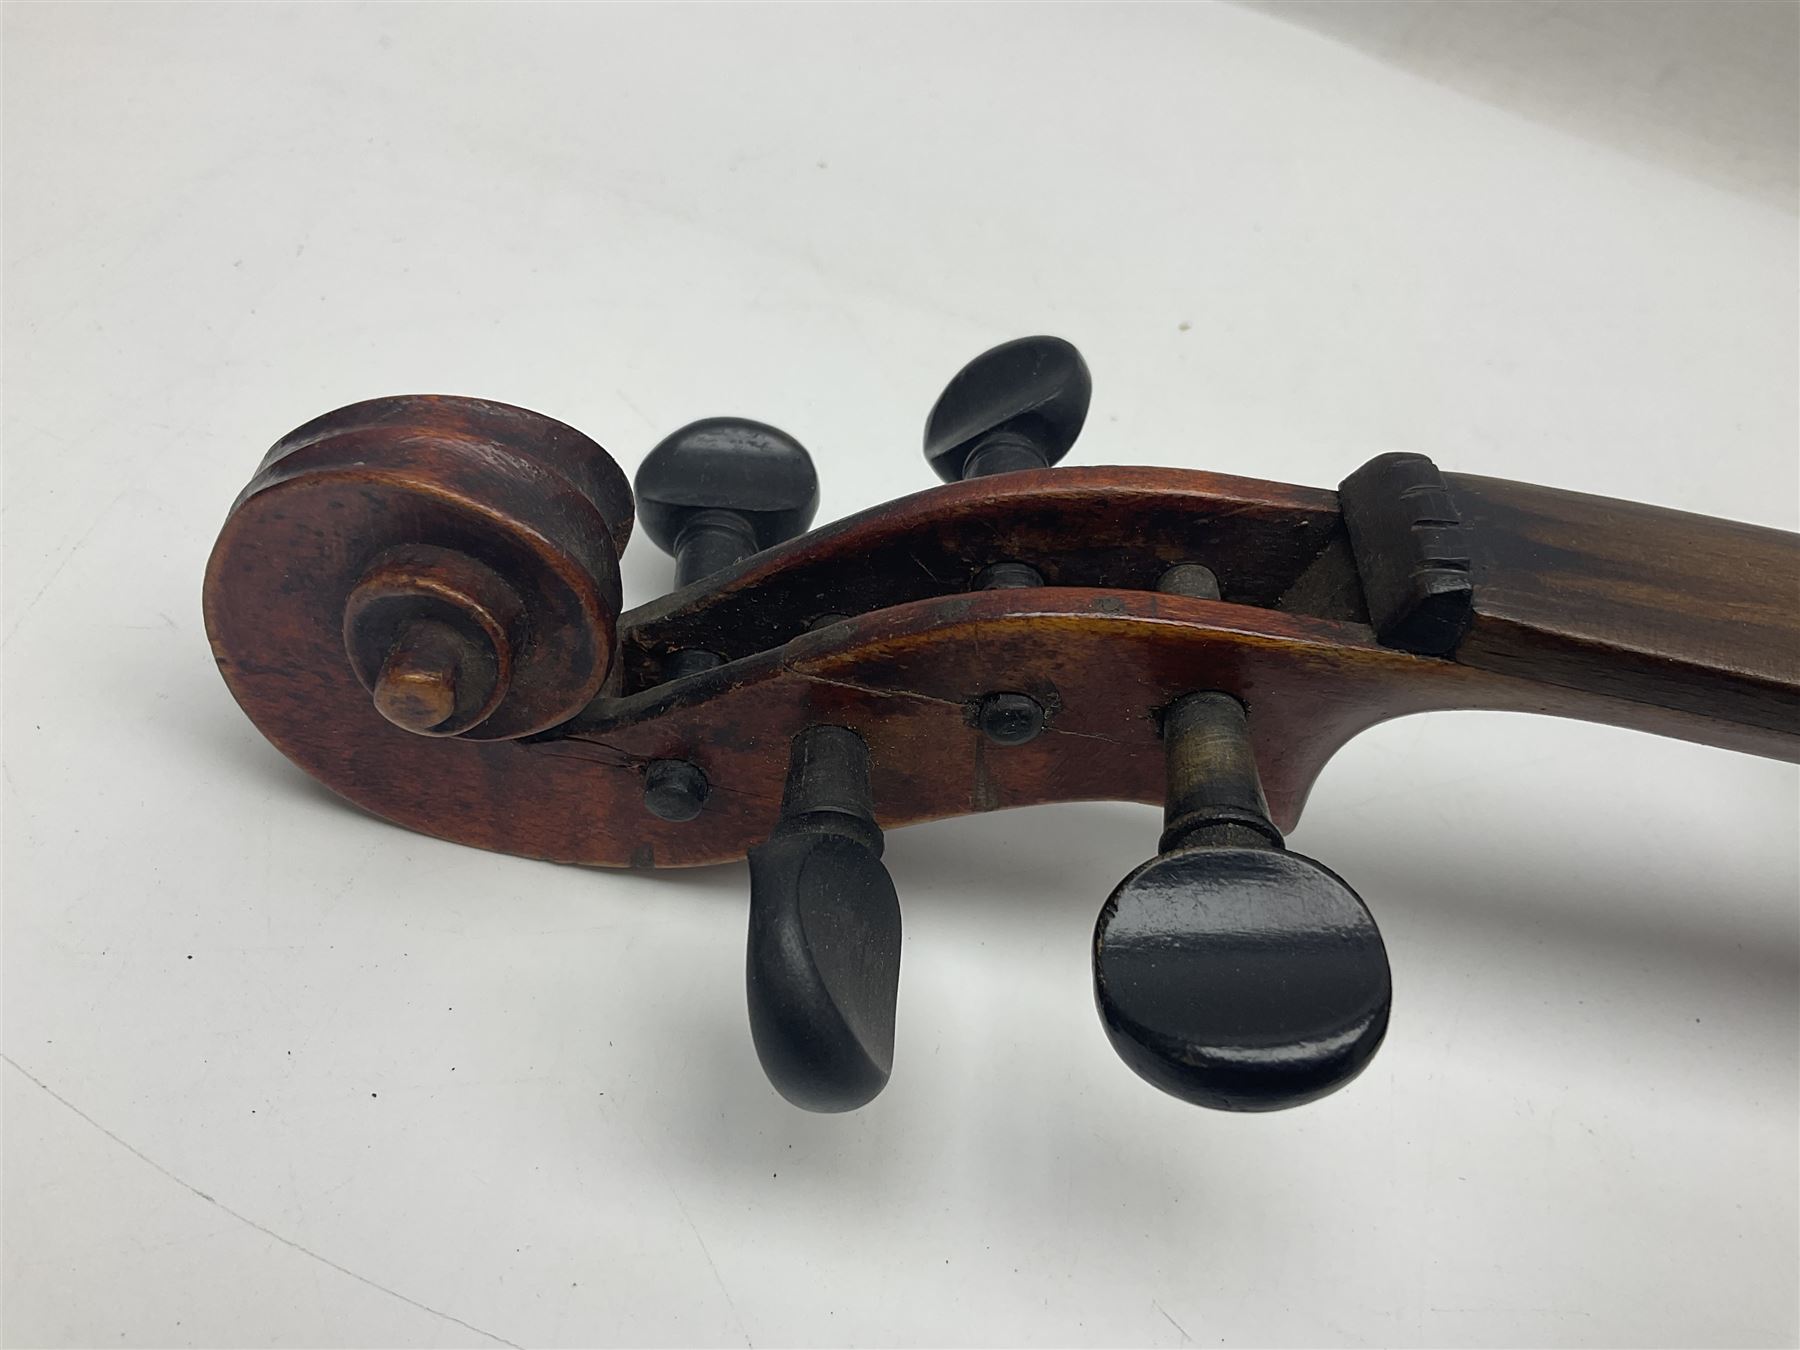 Saxony violin c1890 with 35.5cm two-piece maple back and ribs and spruce top L59cm overall; in carry - Image 8 of 15